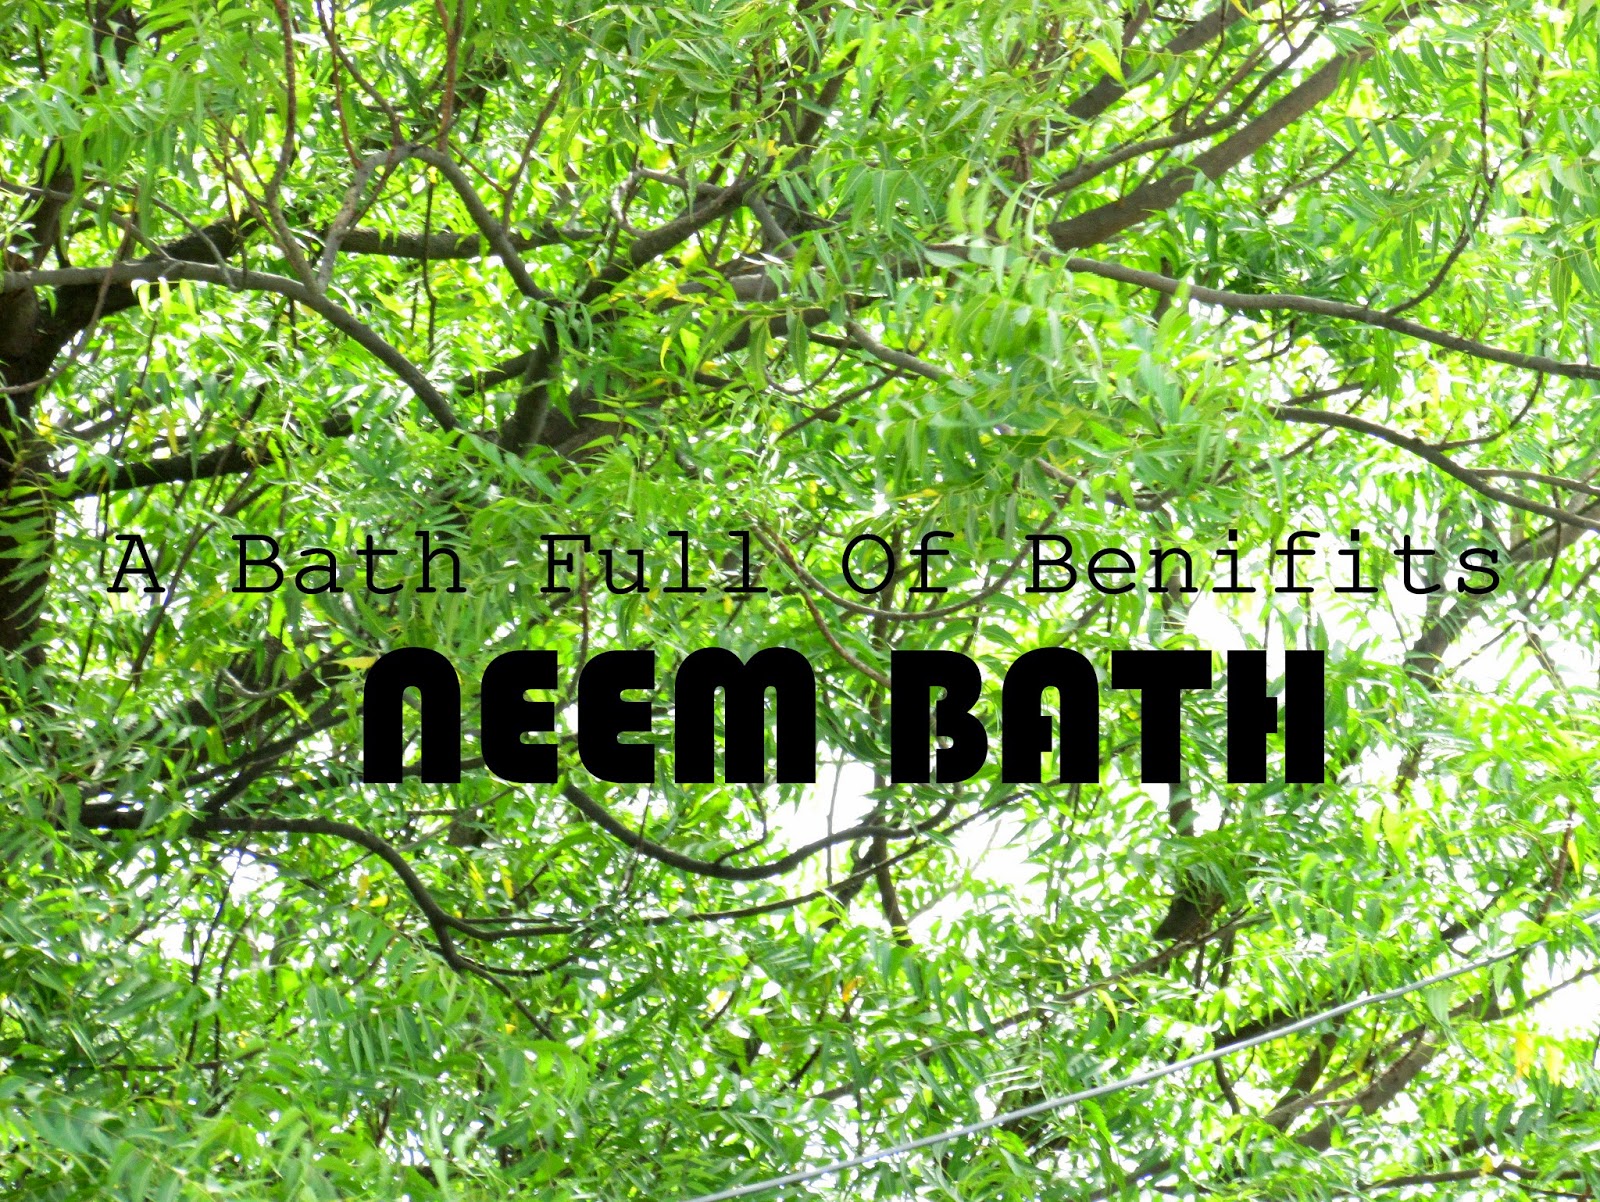 A DIY Bath Salt to relieve stress, tension , pain , body order. A all natural solution to smooth skin and detoxification. This aromatherapy bath salt help to replx, neem , neem bath , neem benifits , neem oil , neem leavs , neem tree , how to use neem , benifits of neem , behingits of using neem, how to use neem as a medicine, how to use neem , how to use neem leaves, how to make neem face pack , how to make neem soap , how to make neem bath sault , how to make neem oil , how to make neem facewash , how to make neem face oil